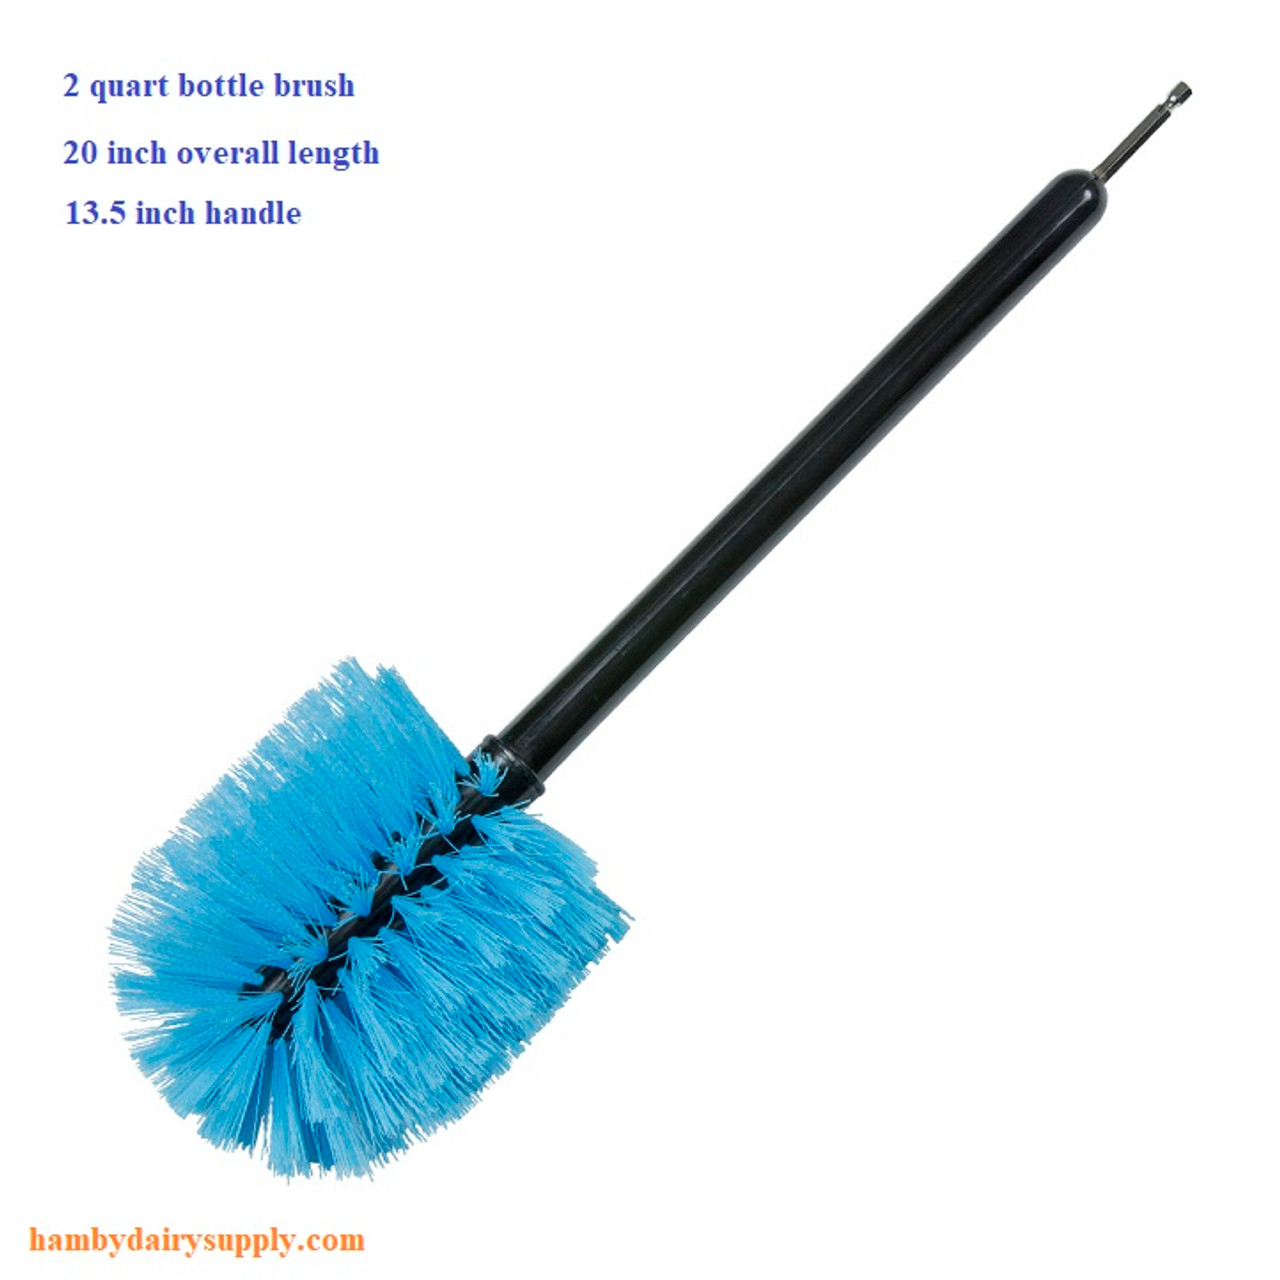 https://cdn11.bigcommerce.com/s-e2tlx9xzx1/images/stencil/1280x1280/products/17175/31254/15-302_Blue_BESS_cleaning_brush-2qt__71451.1616600976.jpg?c=2